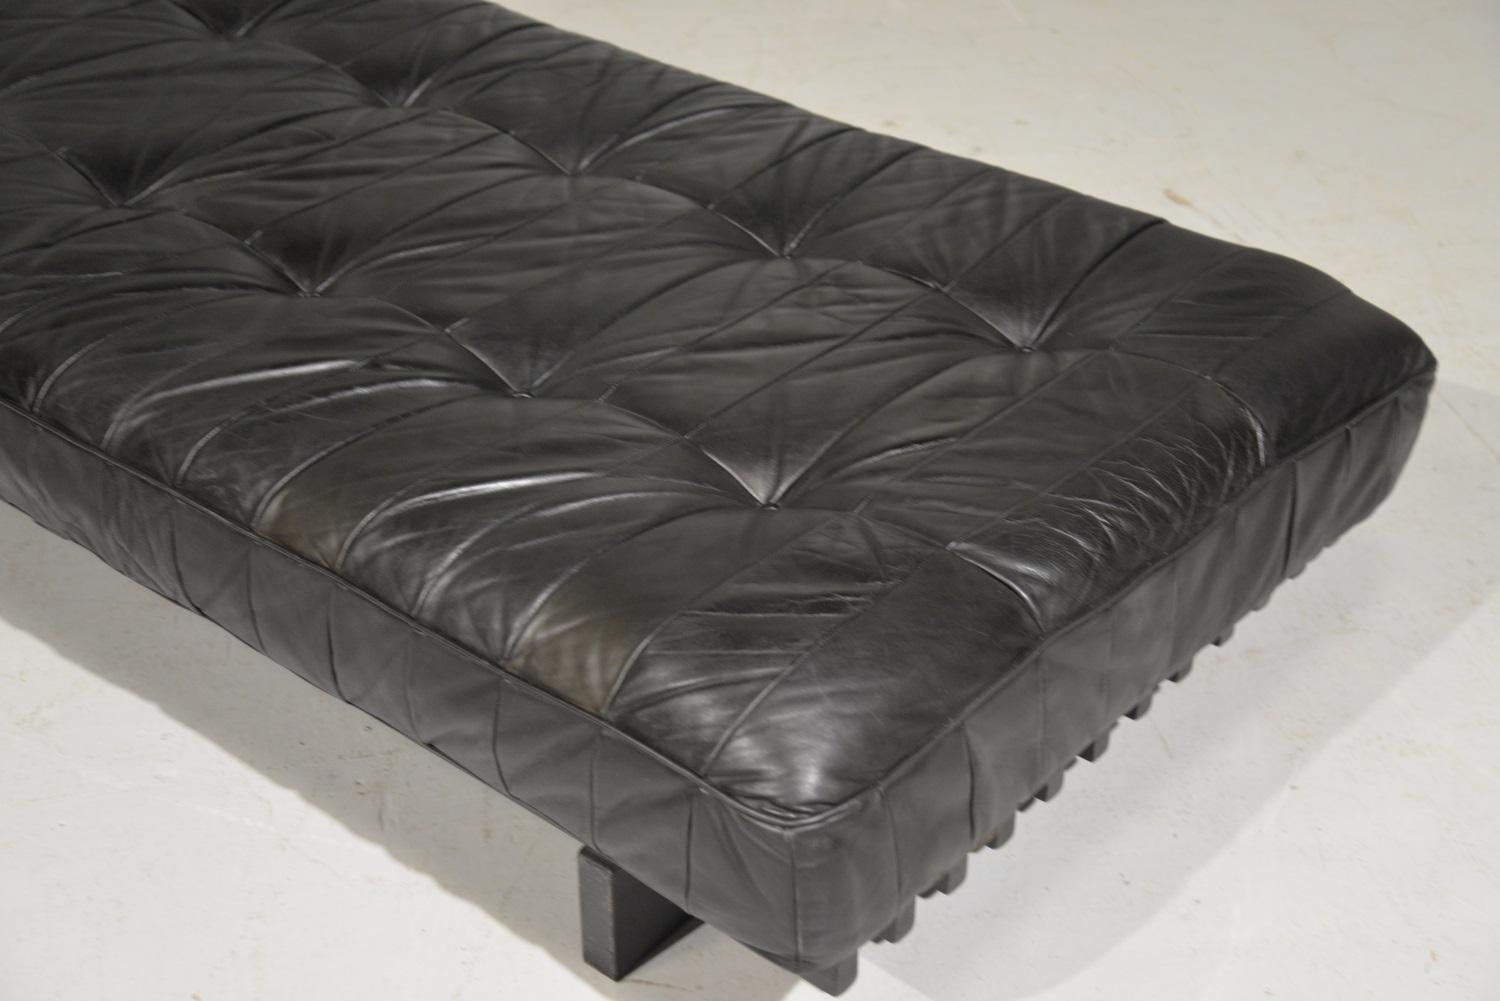 Vintage De Sede DS 80 Patchwork Leather Daybed, Switzerland, 1960s For Sale 9